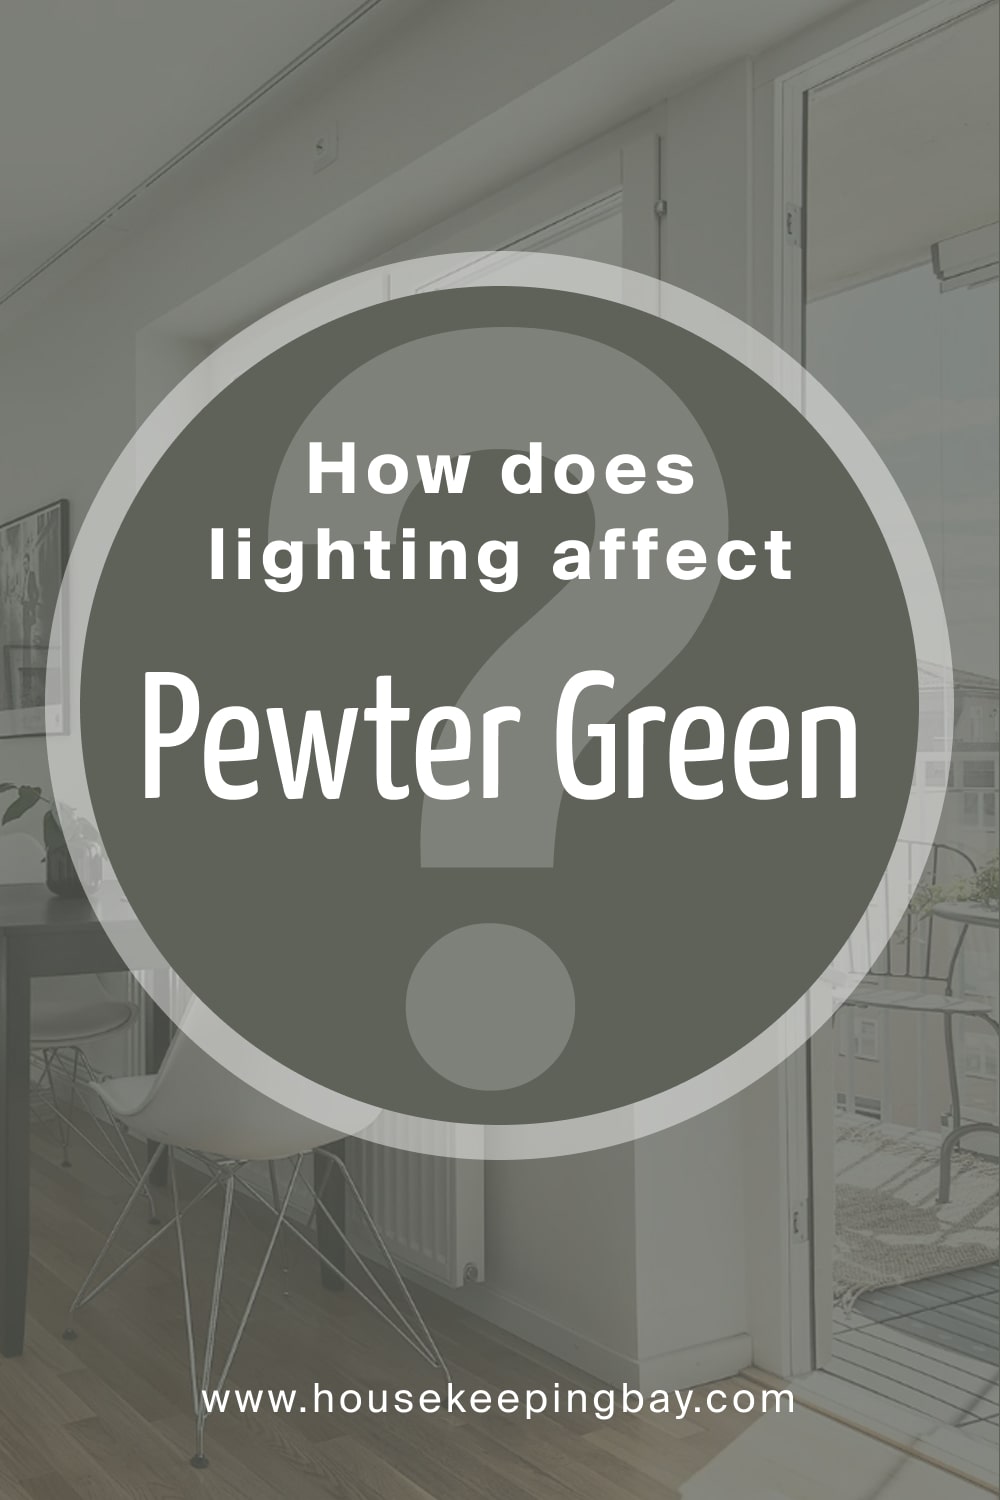 How Does Lighting Affect of Pewter Green by Sherwin Williams